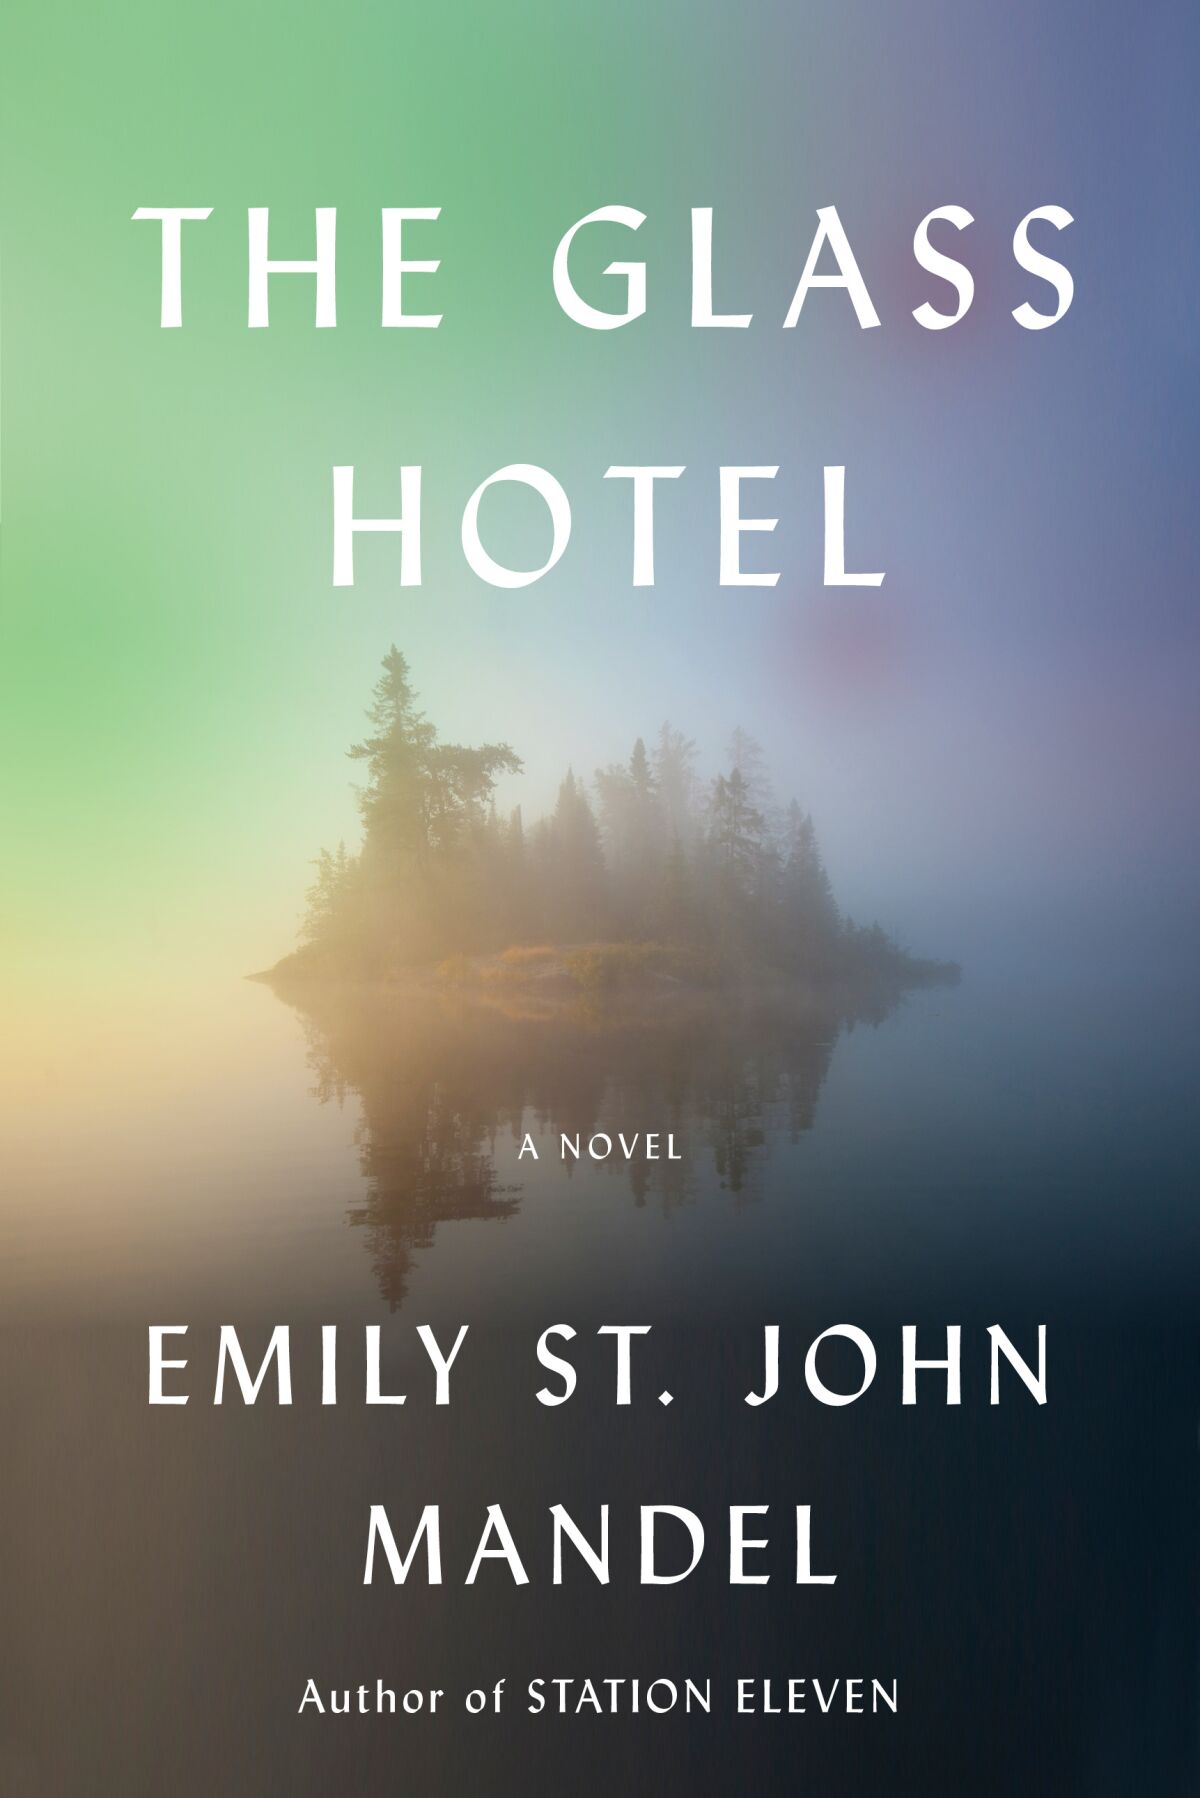 A book jacket for Emily St. John Mandel's "The Glass Hotel." Credit: Knopf